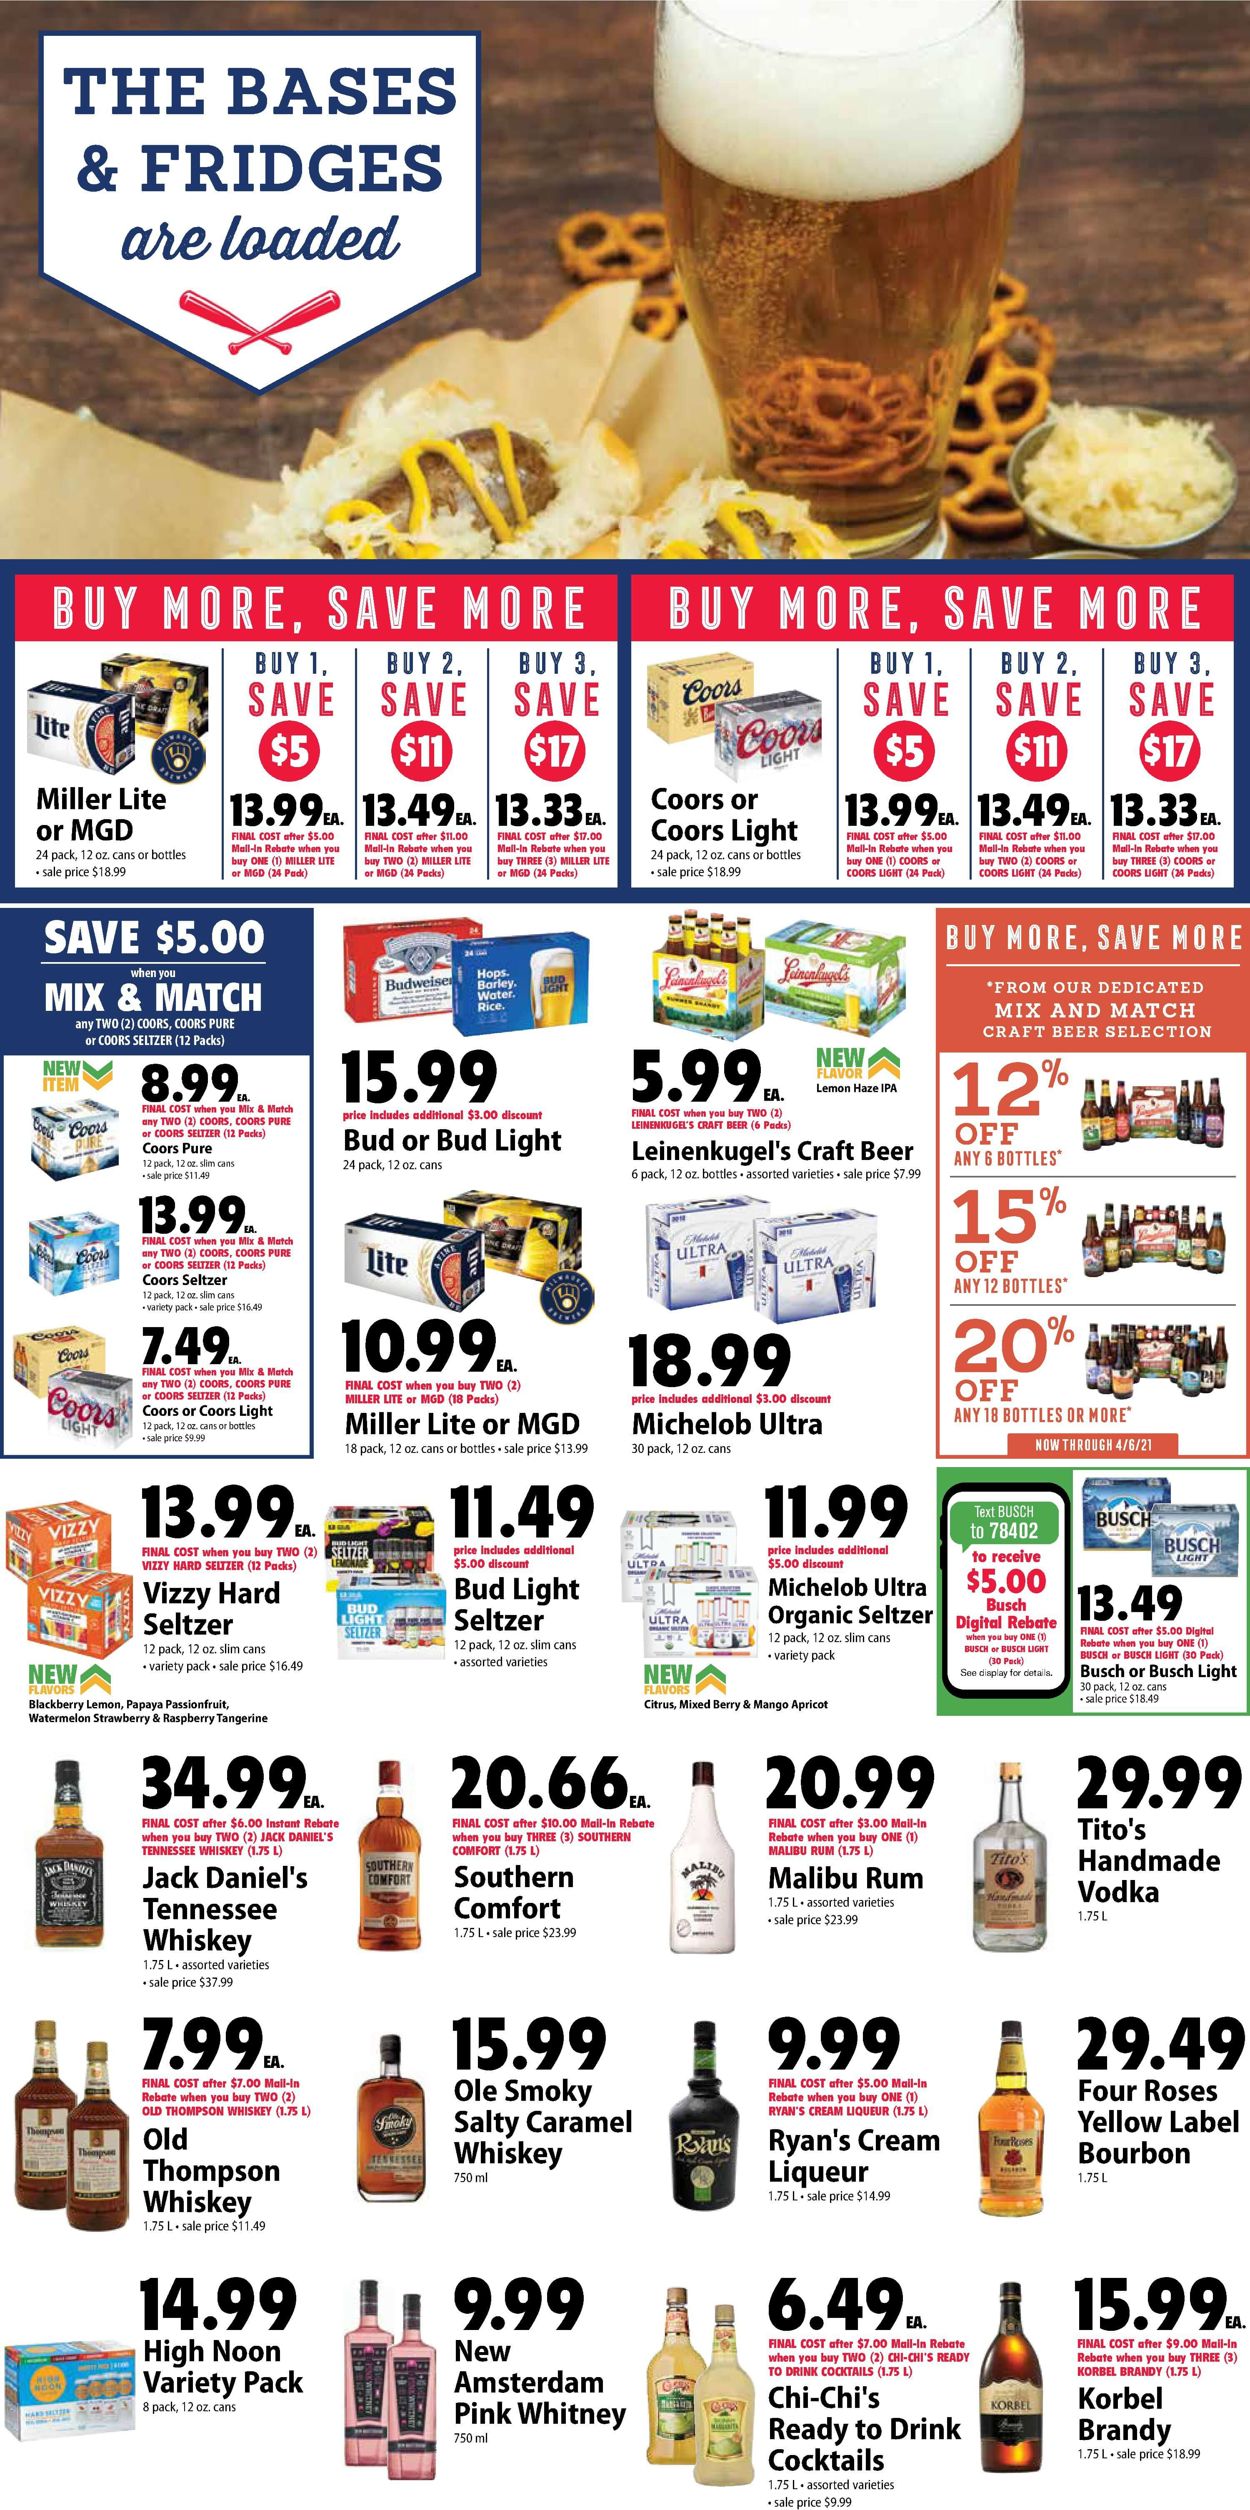 Festival Foods Easter 2021 ad Weekly Ad Circular - valid 03/31-04/06/2021 (Page 5)